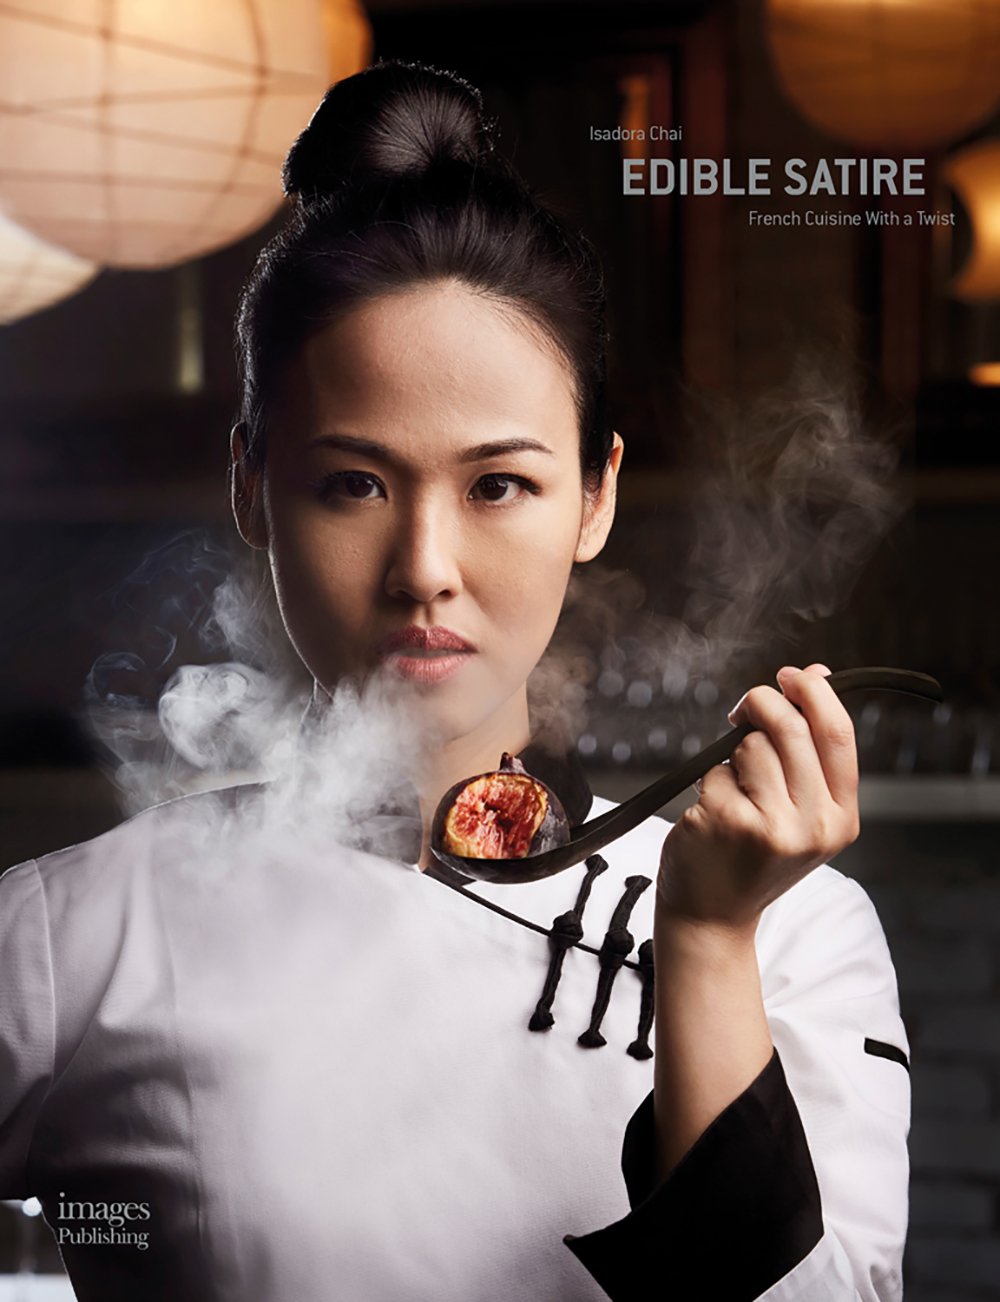 Edible Satire: French Cuisine with a Twist (Isadora Chai)